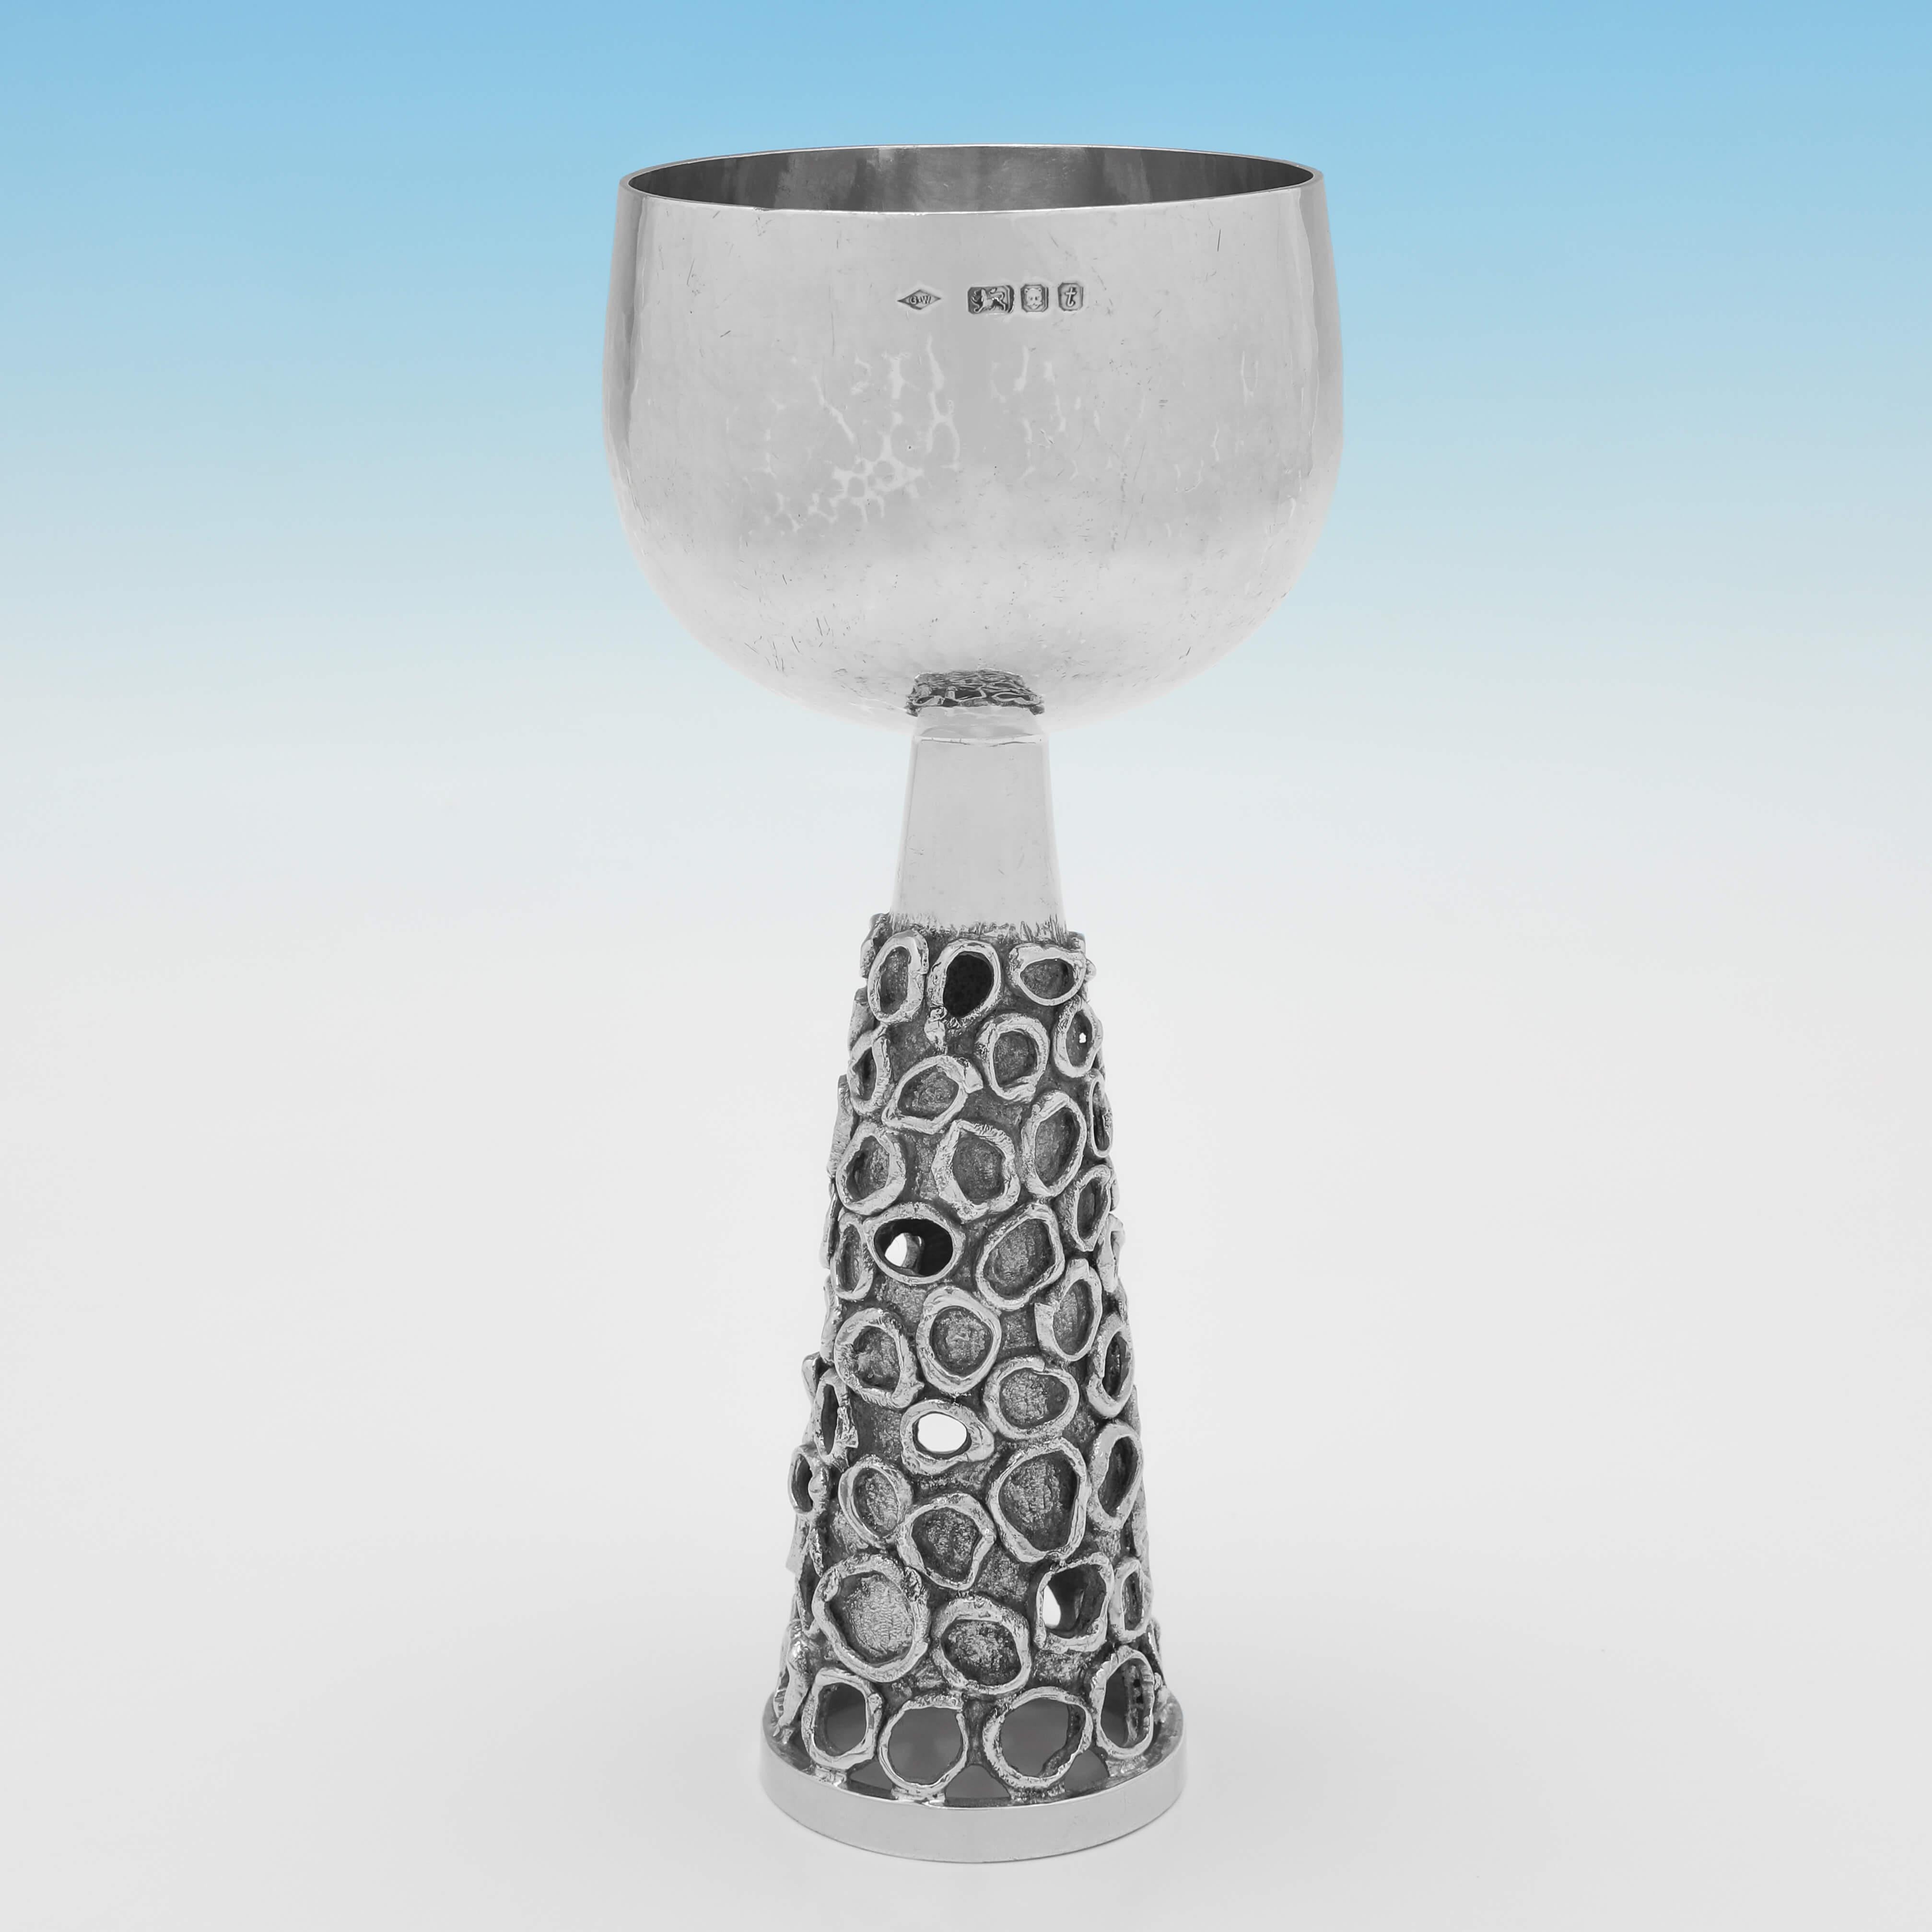 This very stylish set of 8 sterling silver wine goblets were hallmarked in London in 1974 by Graham Watling. 

The goblets are a fine example of the handcrafted and hand raised silverware that Graham was known for, and they would have formed an